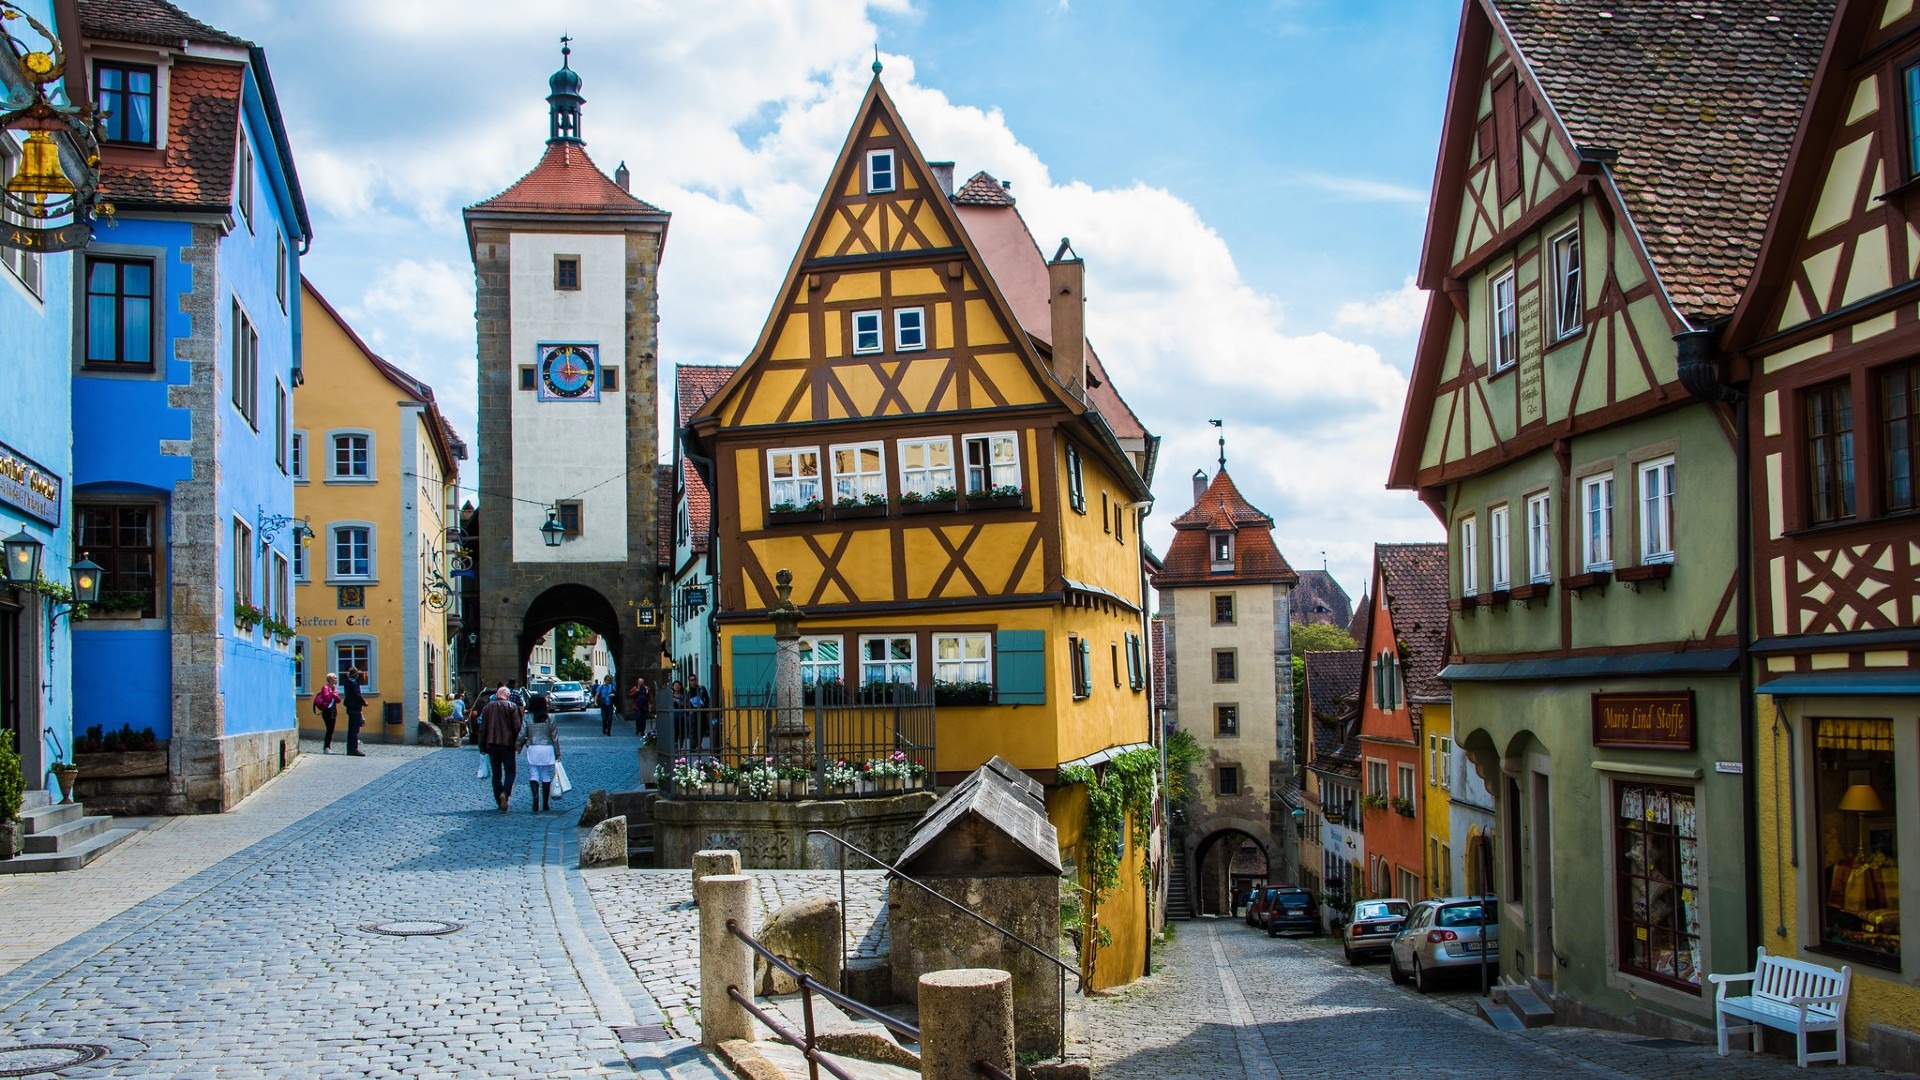 Medieval townhouses in Rothenburg, Germany